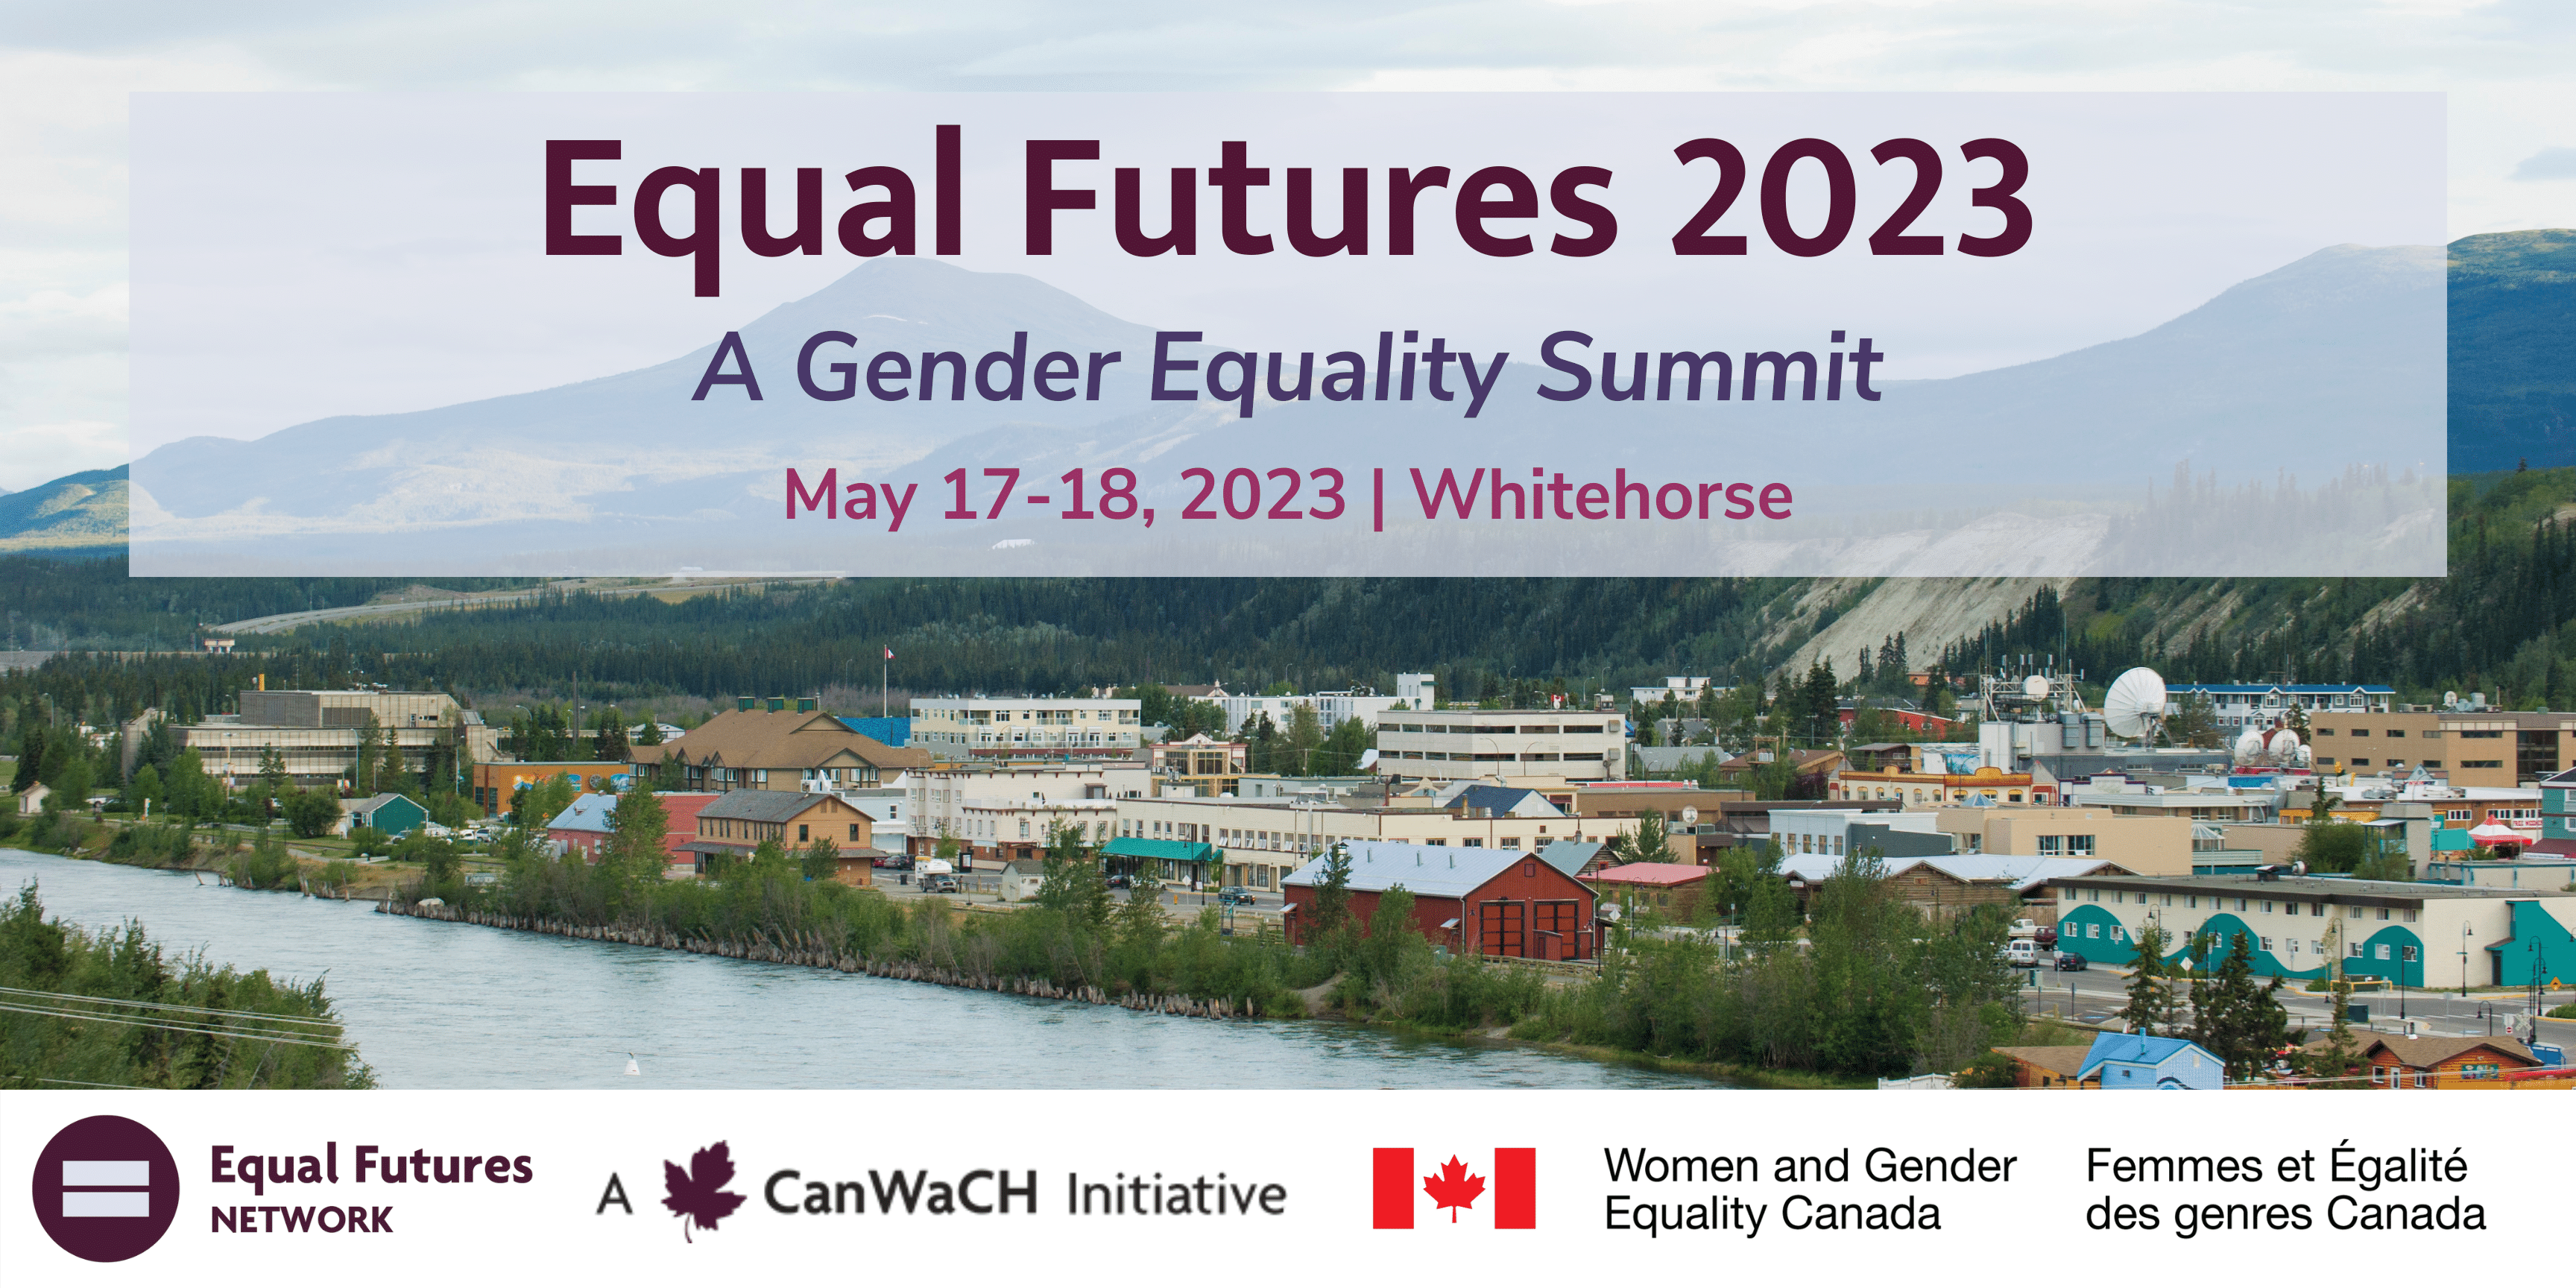 Gender Equality Summit Coming to Whitehorse in May 2023